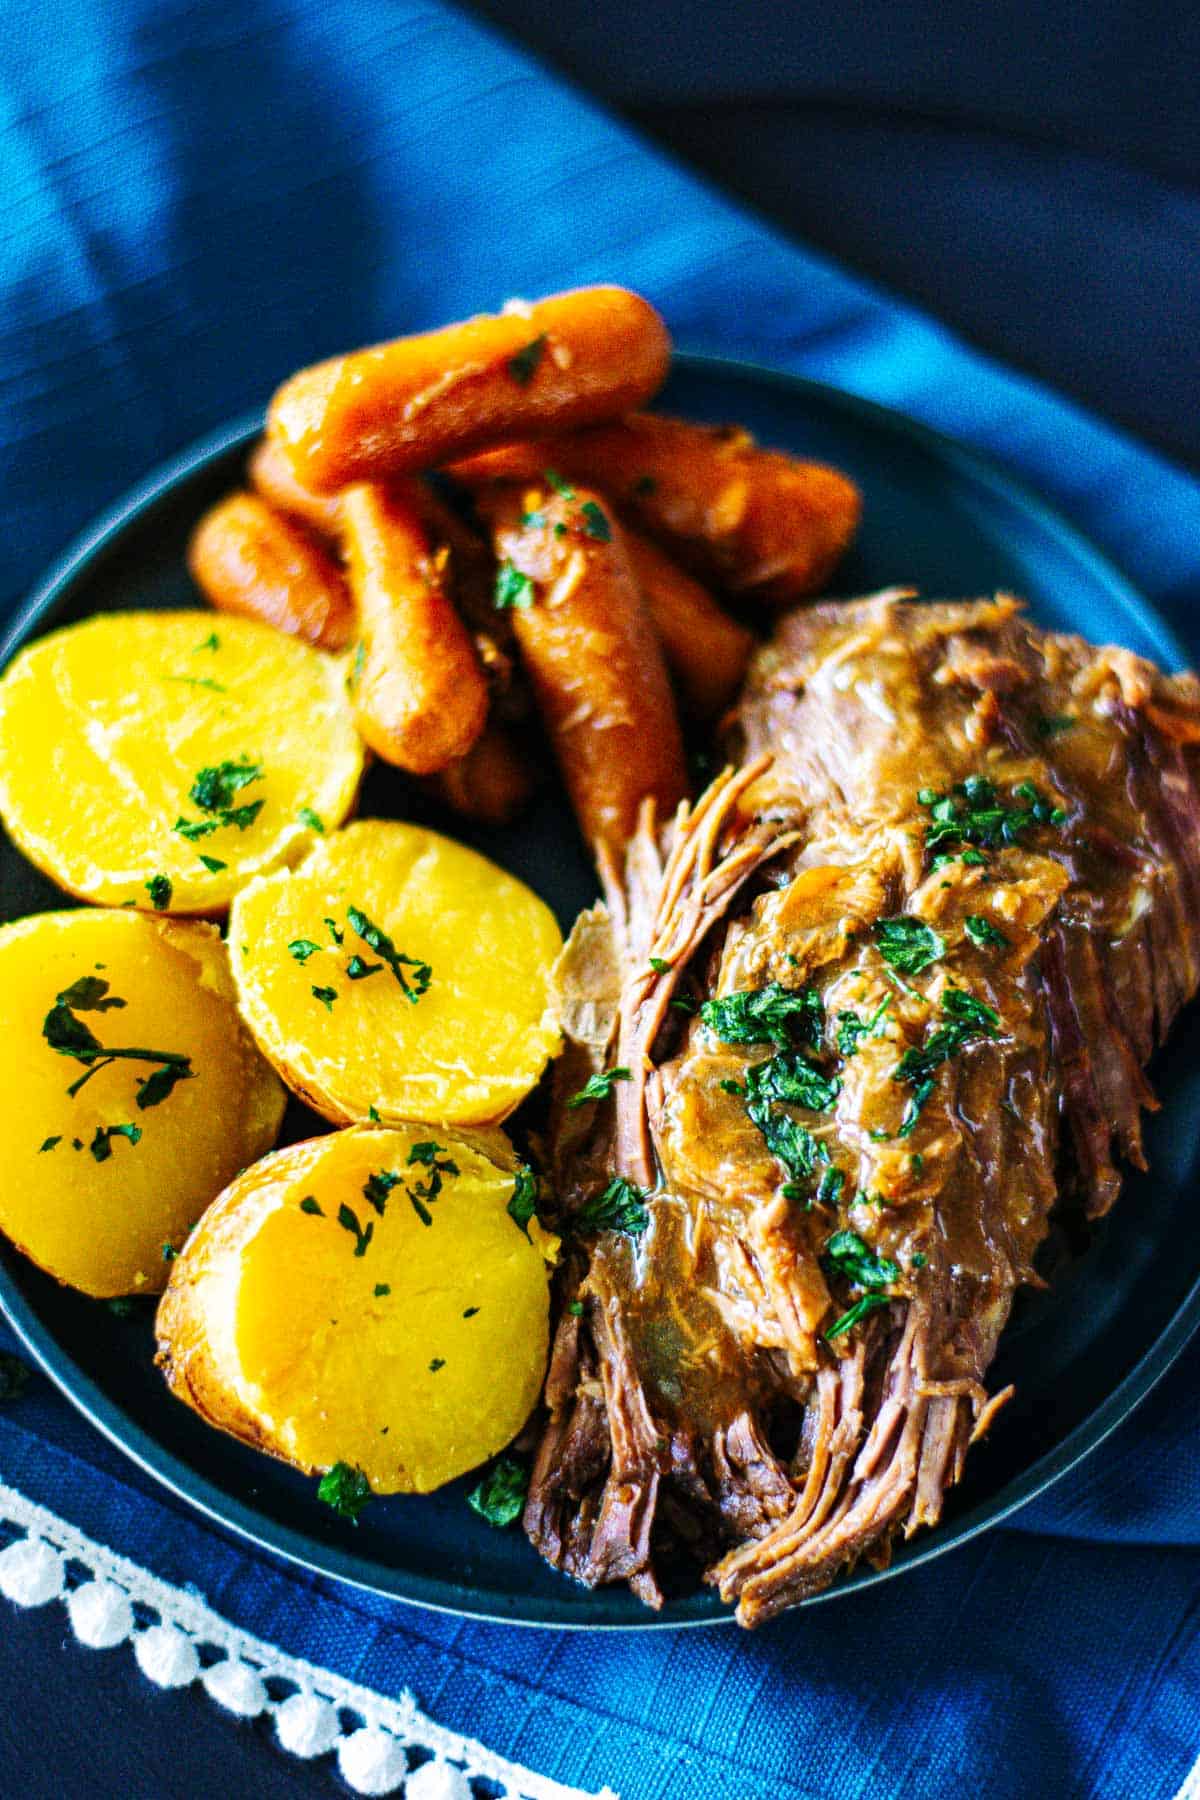 Tender Pork Roast topped with gravy and parsley plated with potatoes and carrots.